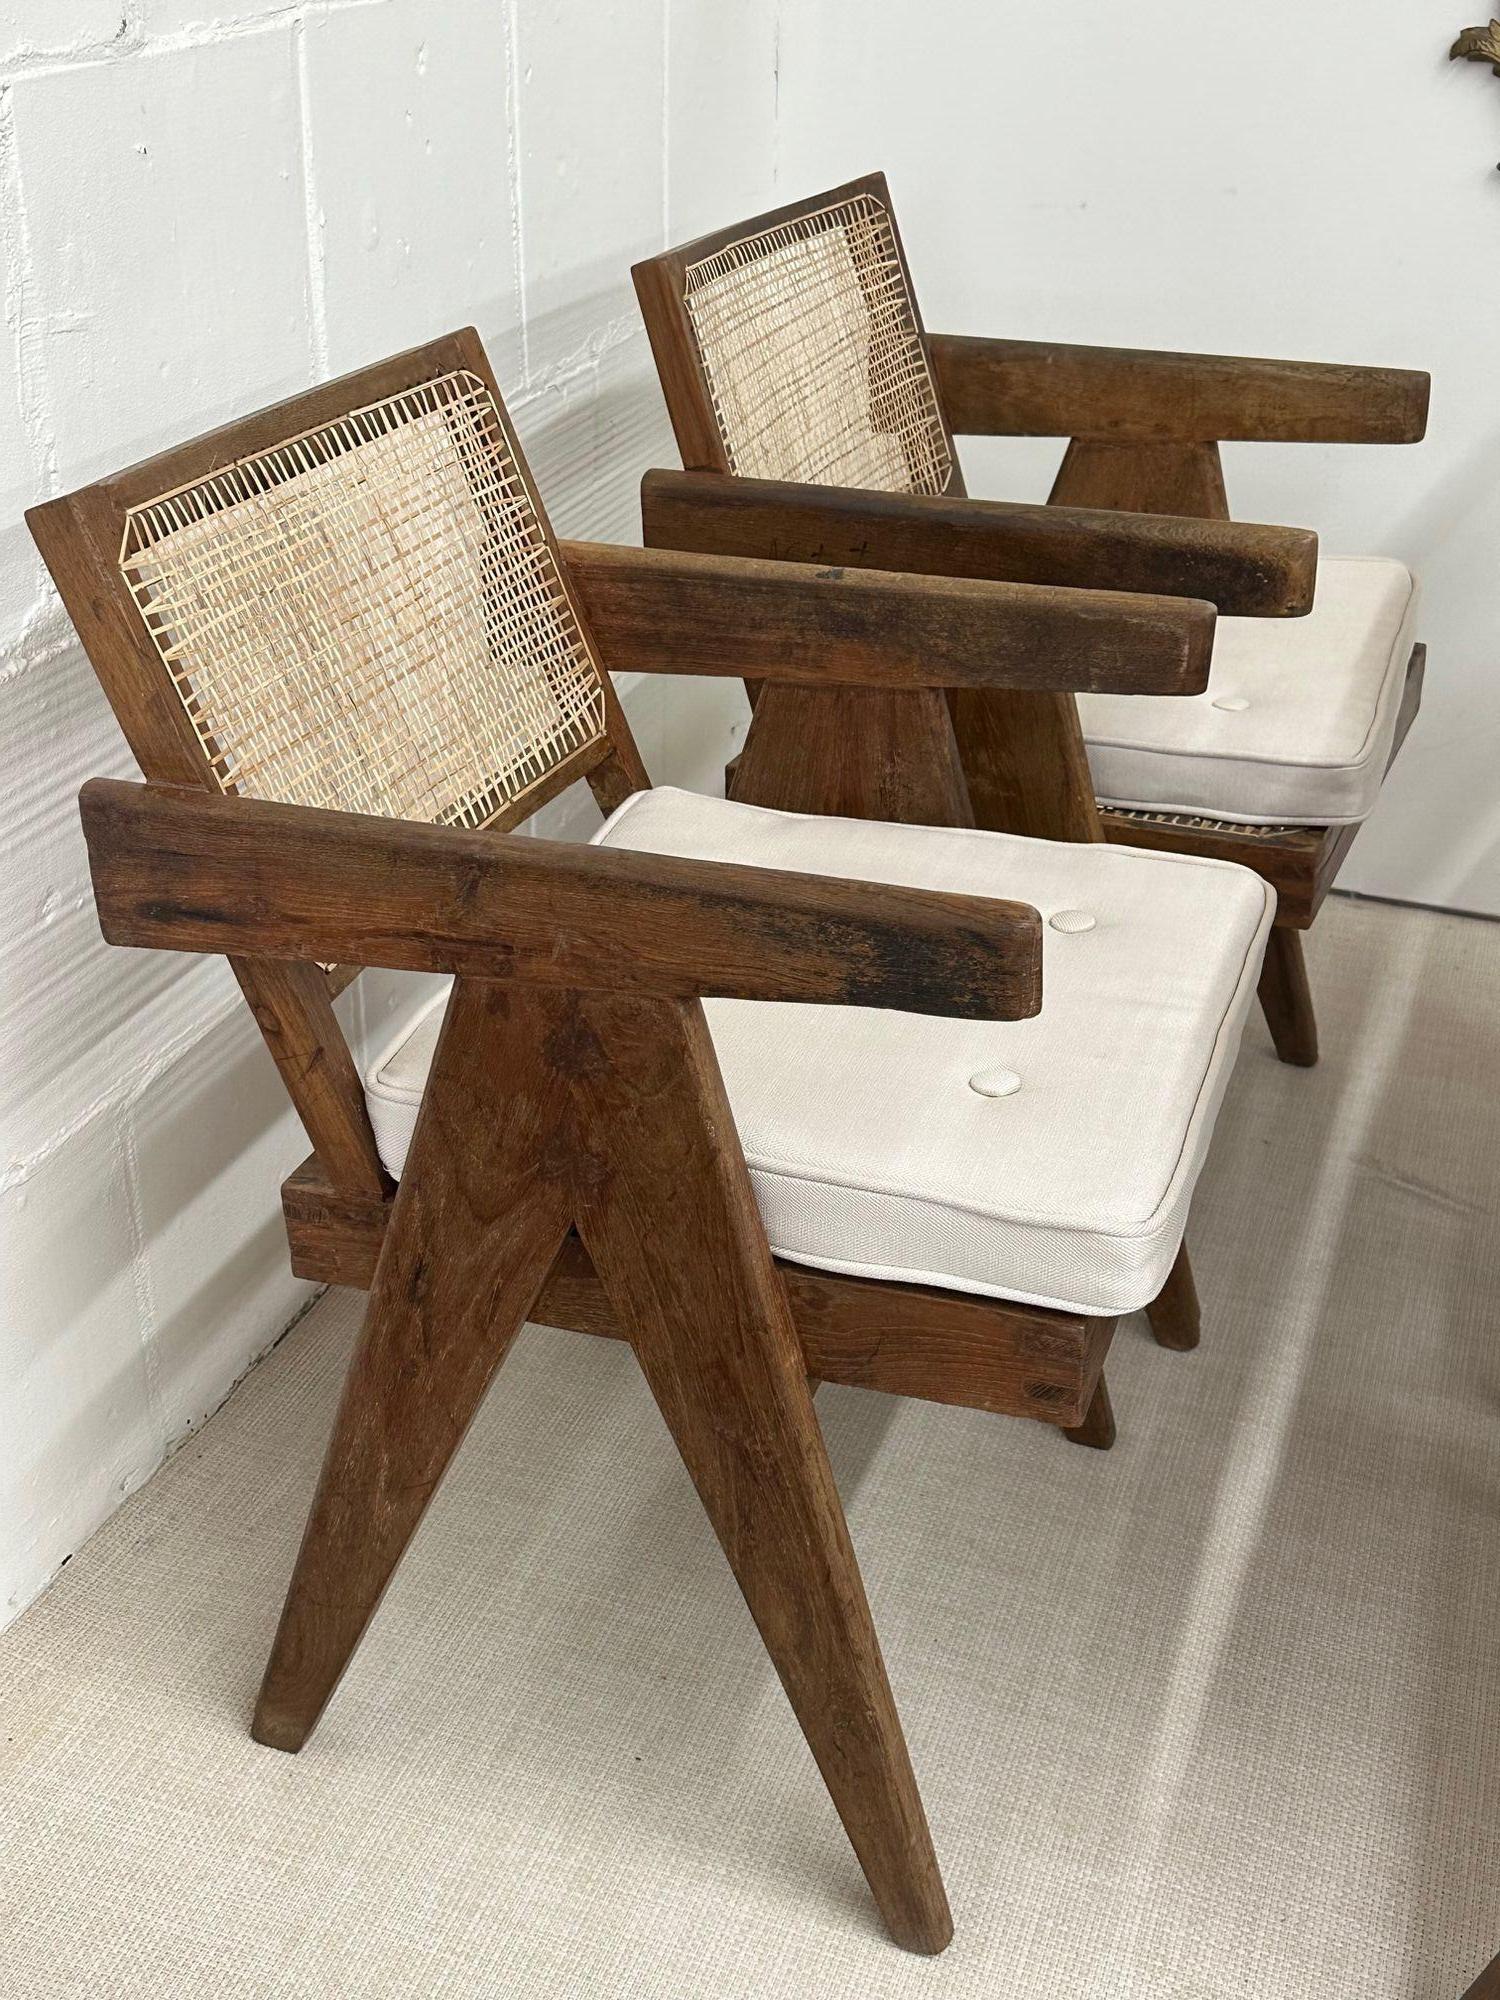 Pierre Jeanneret, Mid-Century Modern, Dining Chairs, Teak, Cane, India, 1960s 3